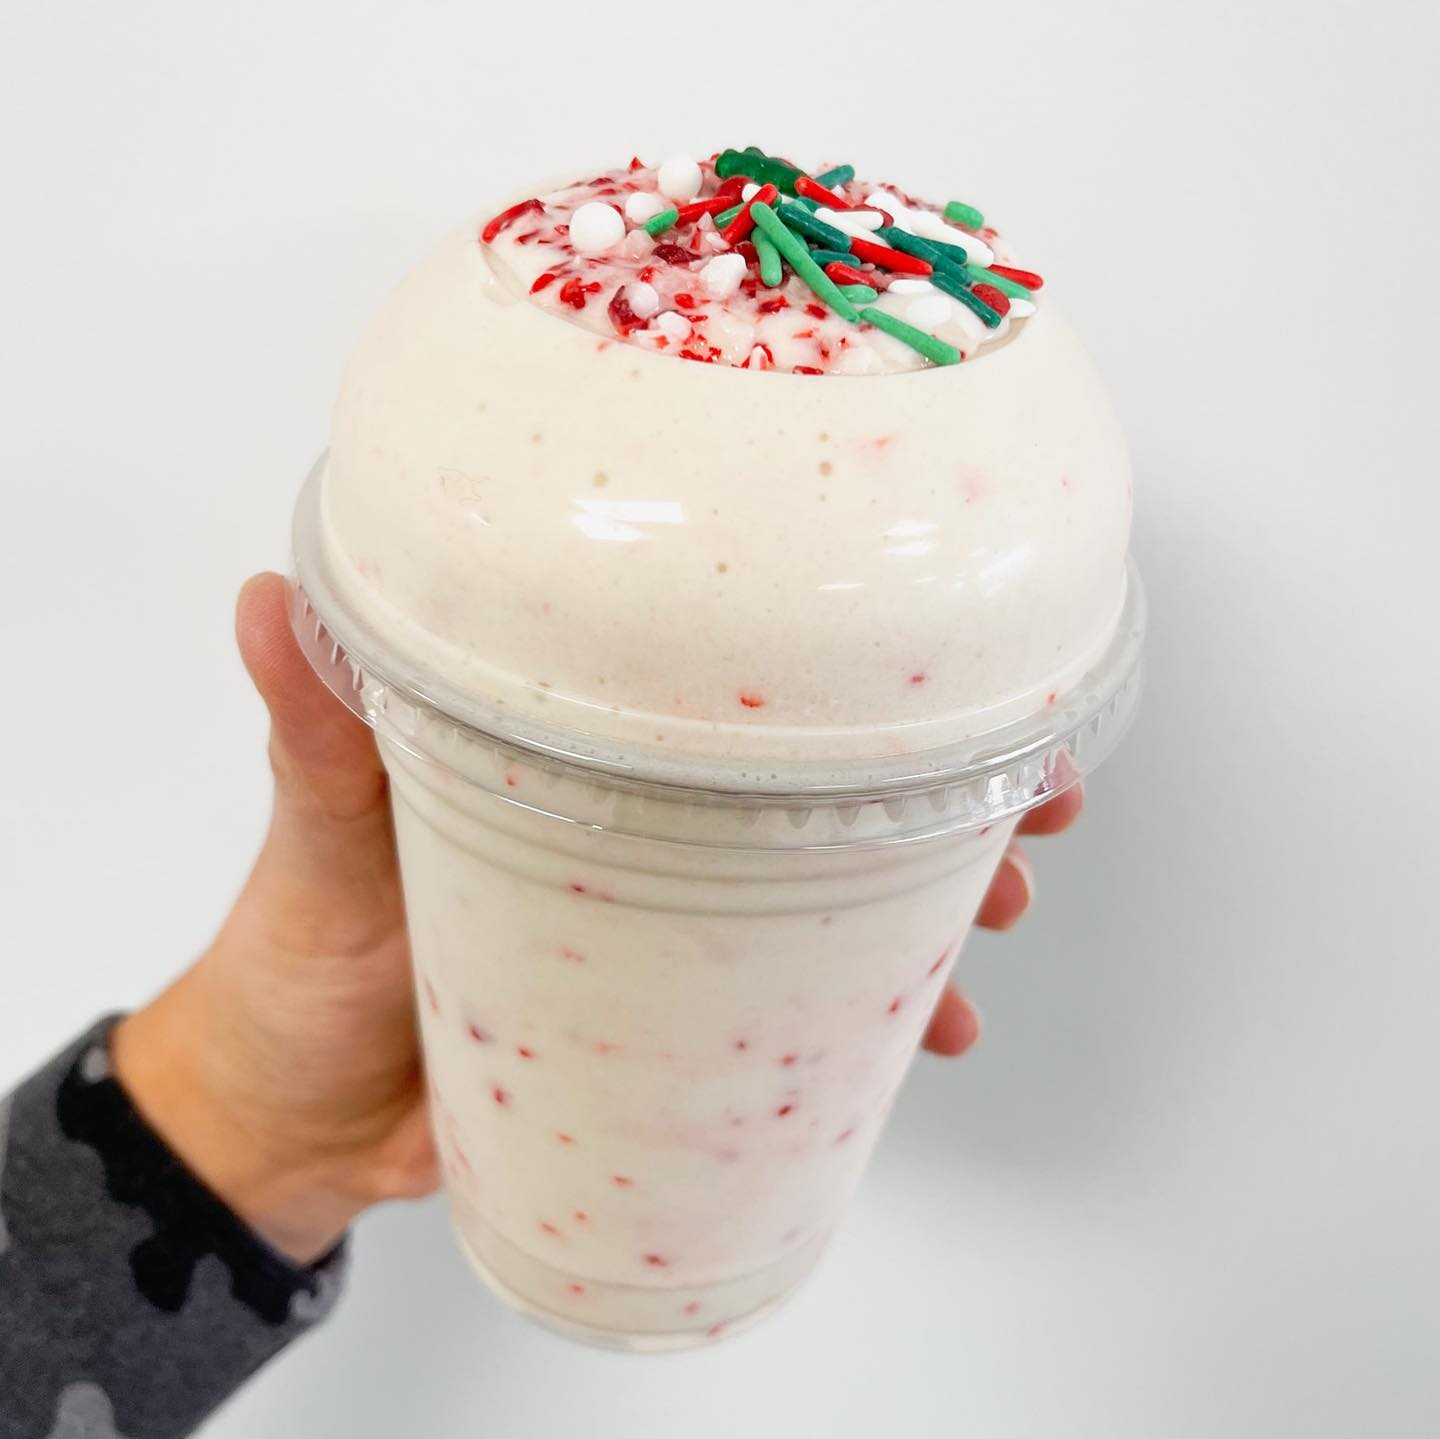 a smoothie with green and red sprinkles on top